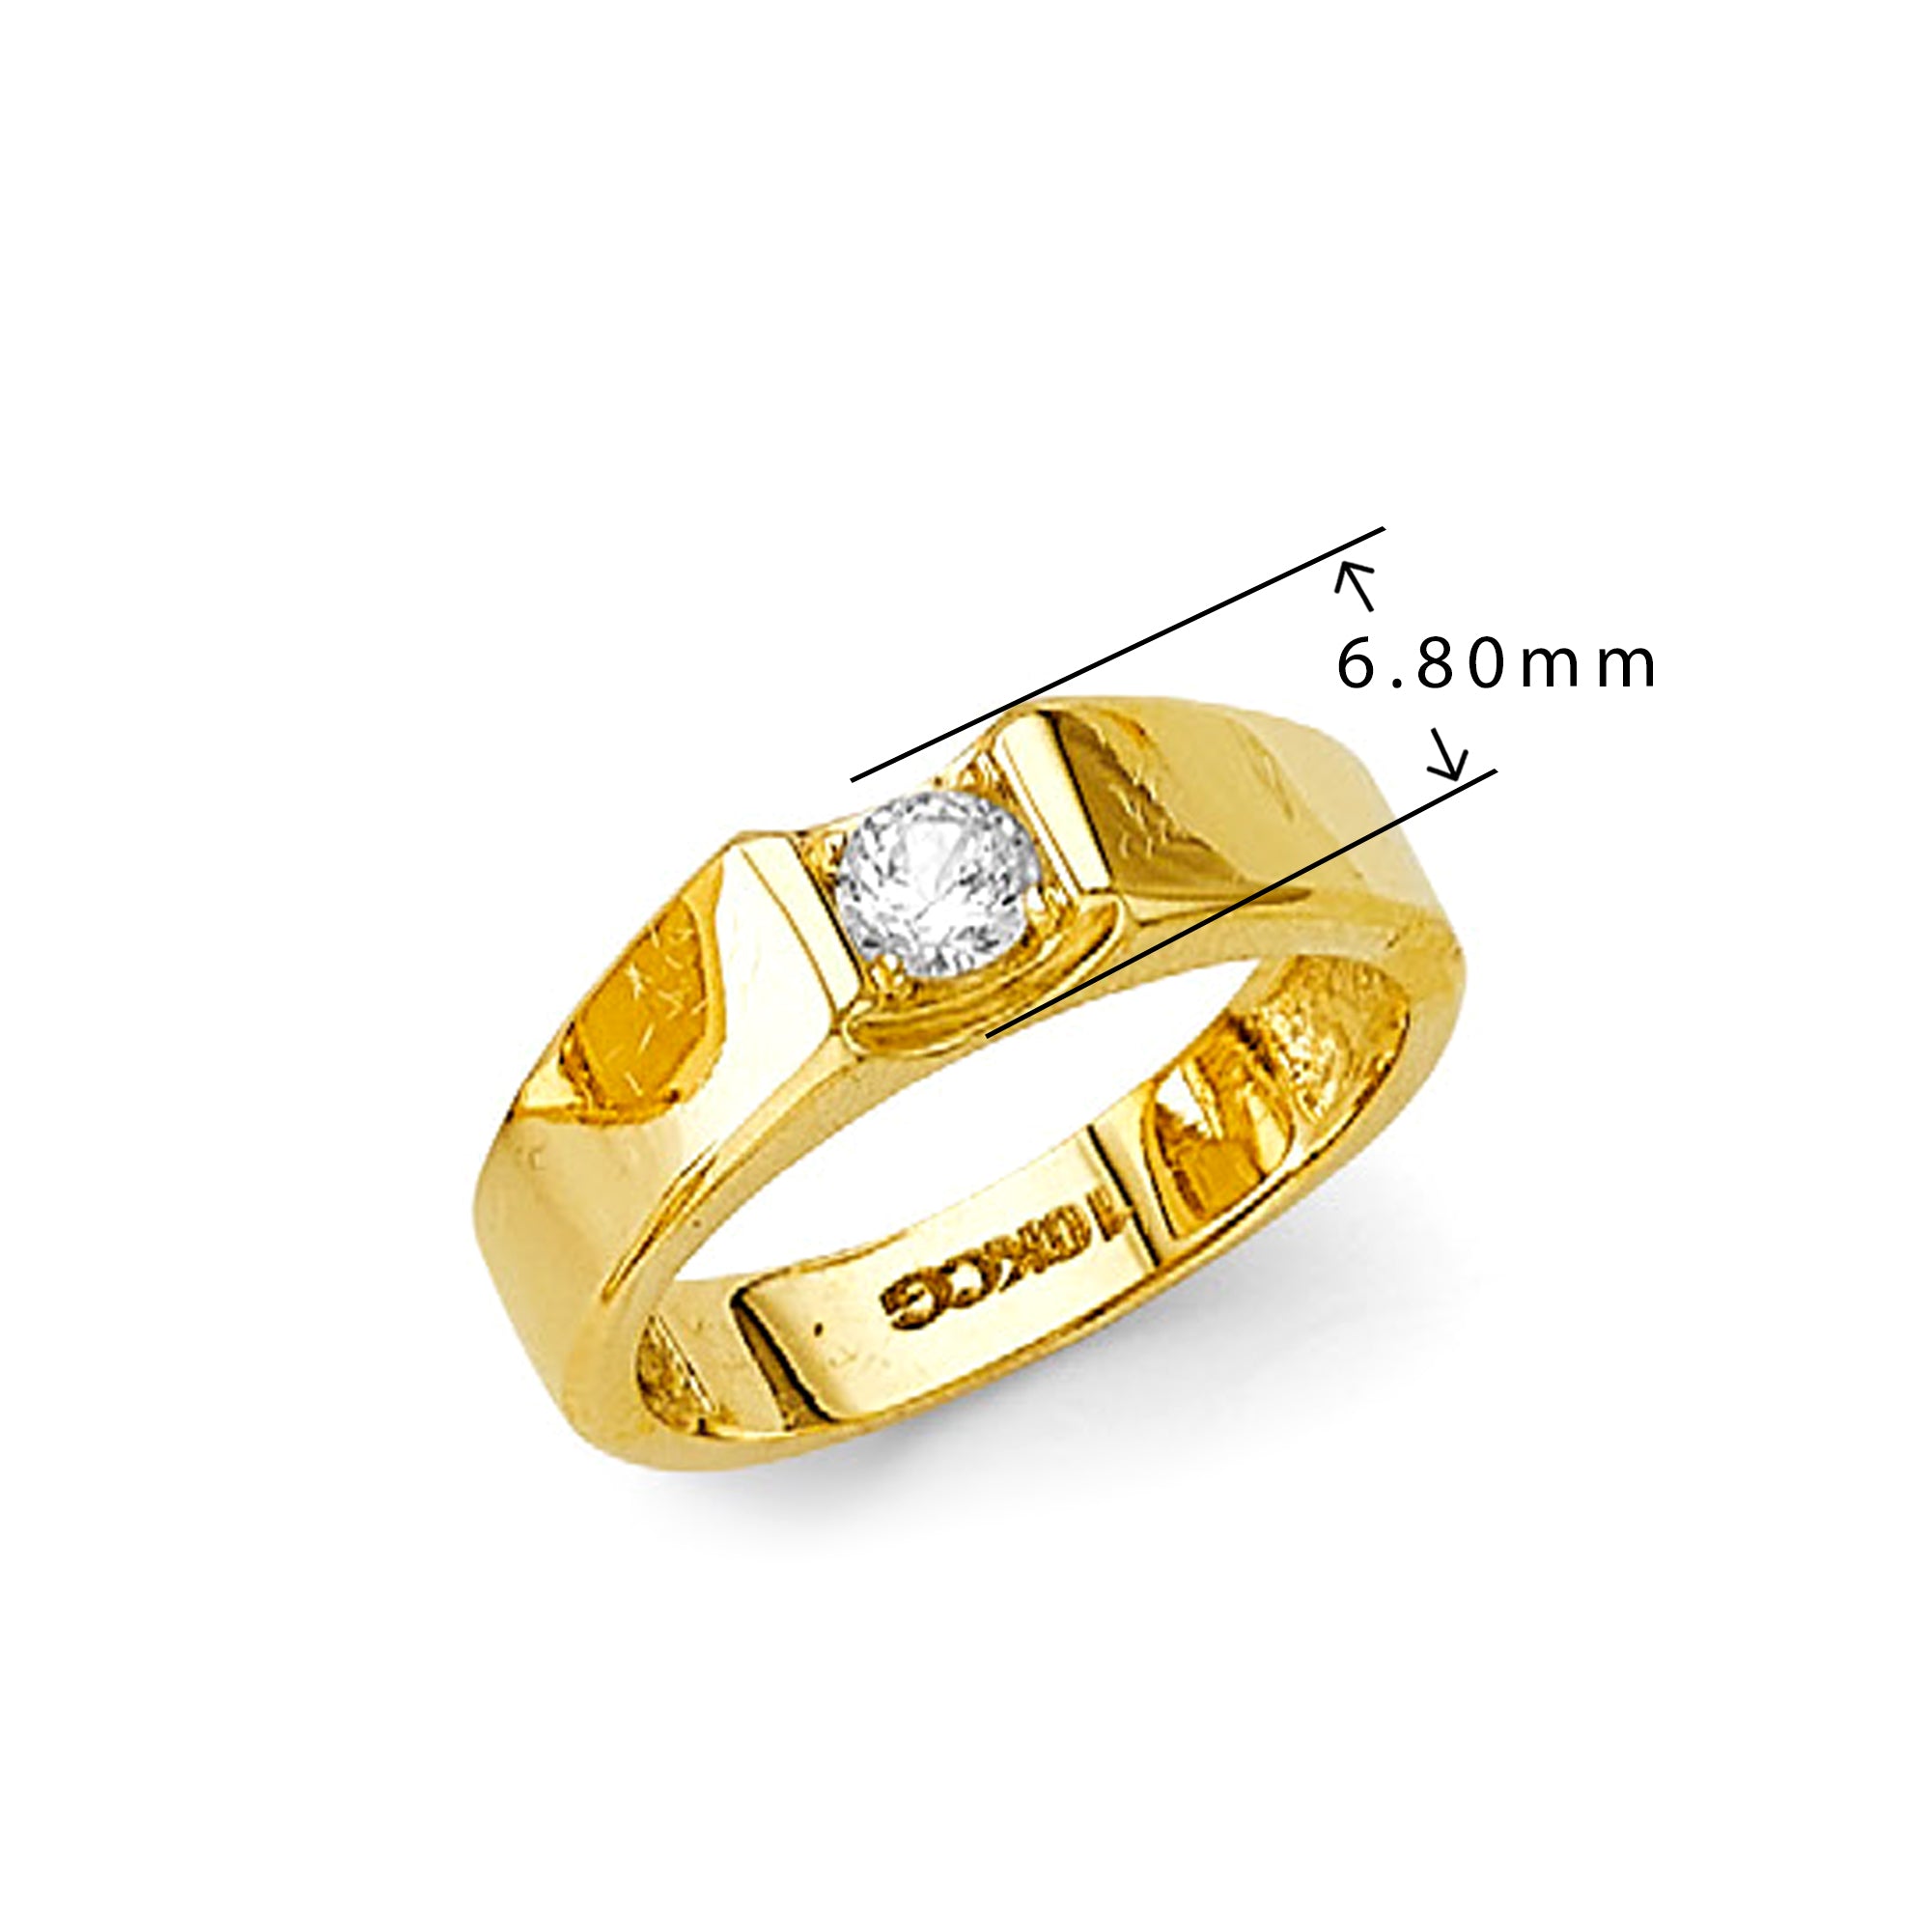 CZ Signature Sleek Round Ring in Solid Gold with Measurement